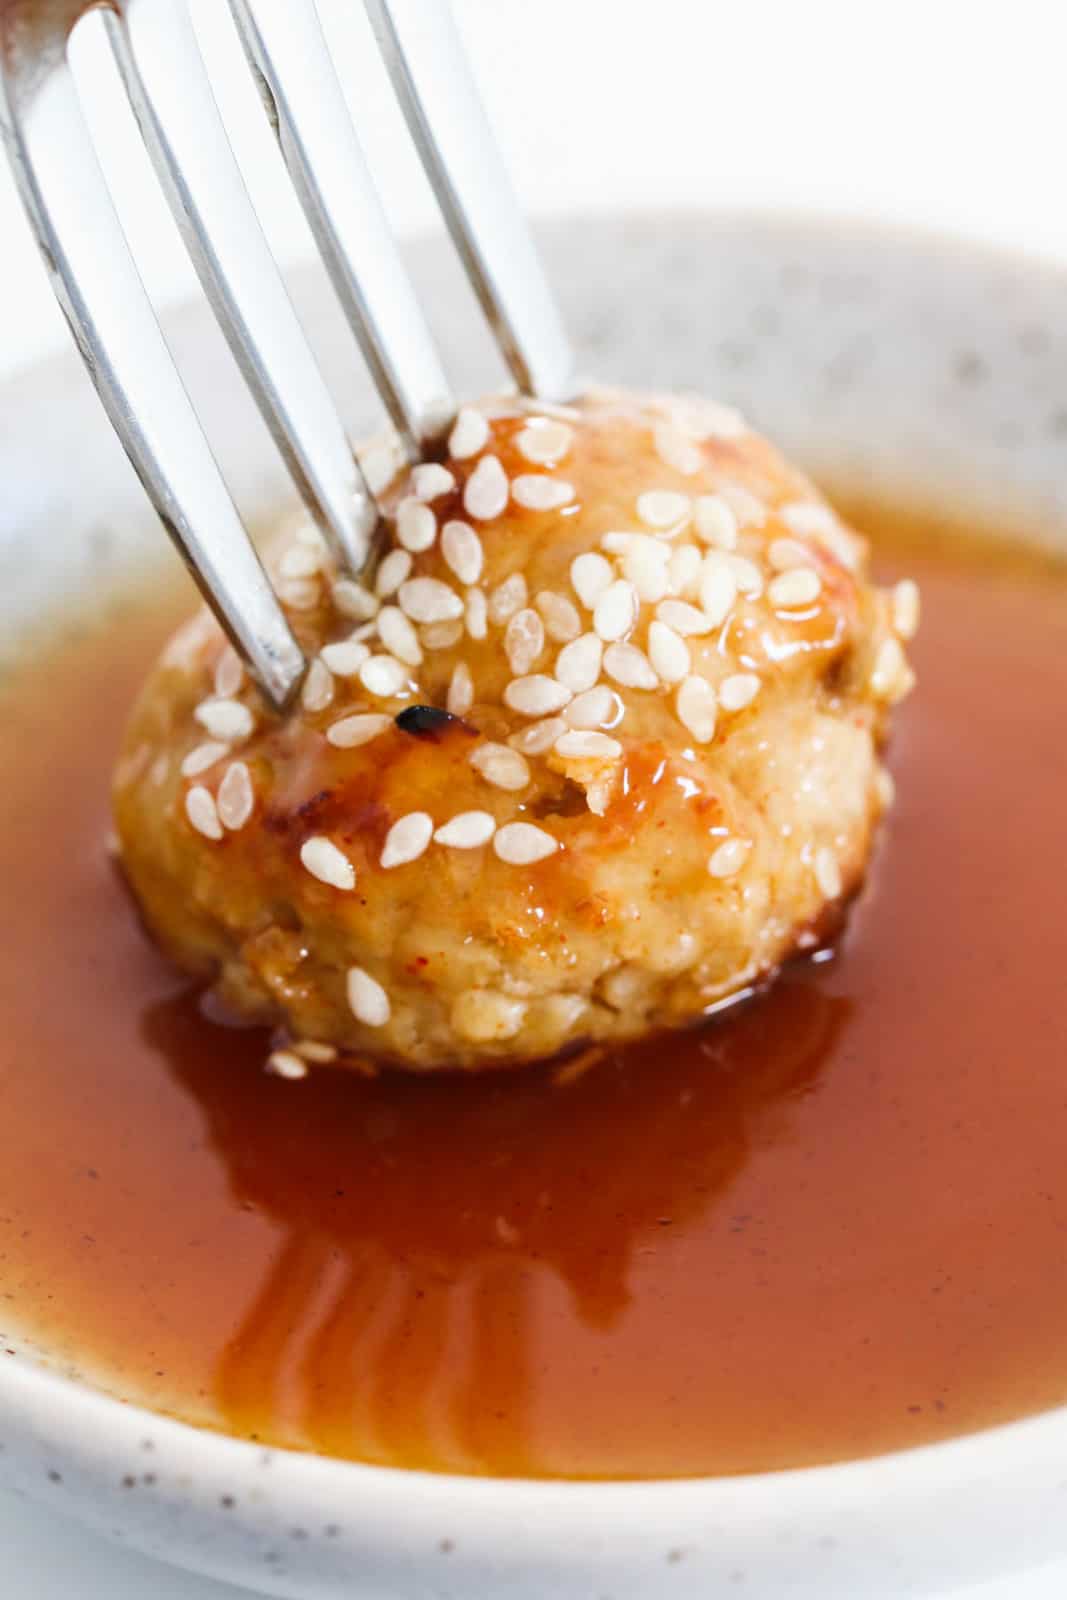 A chicken meatball being dipped into a sweet chilli and lime sauce.